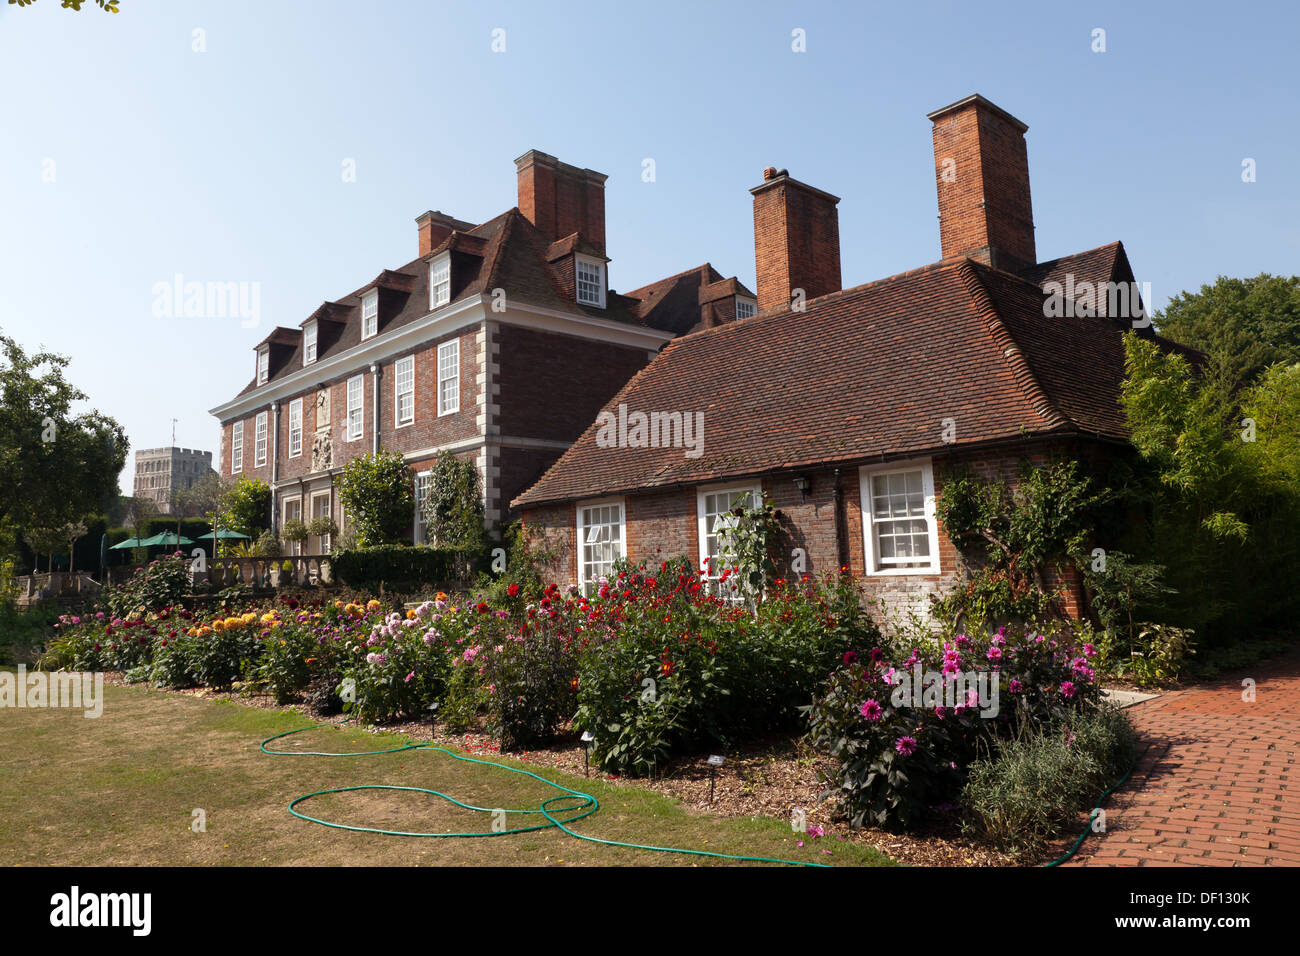 The Salutation in Sandwich, a Grade I-listed manor house  designed by famous architect Sir Edwin Lutyens. Stock Photo